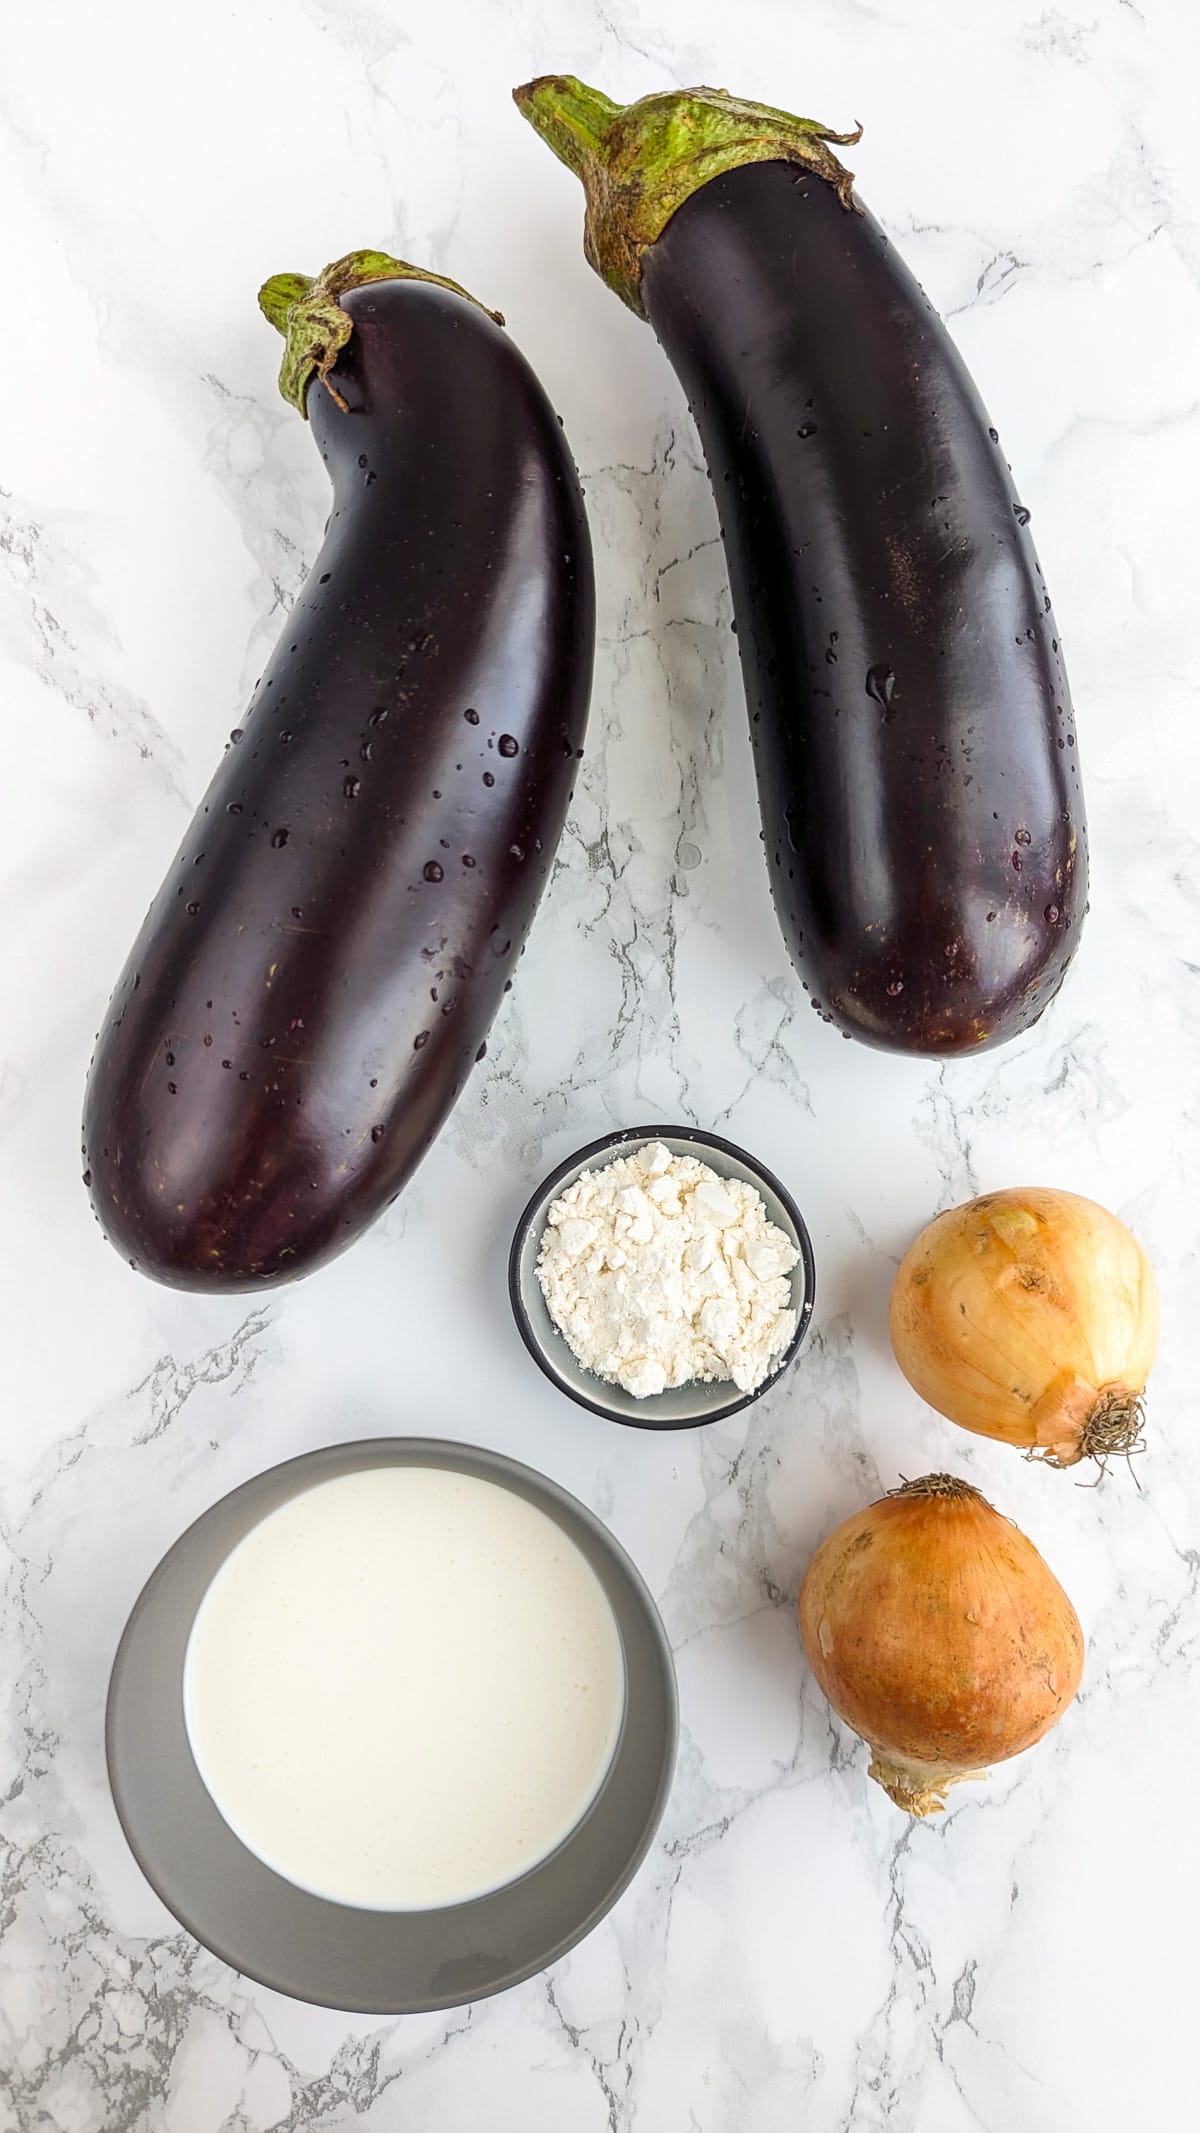 Two eggplants sitting near two onions, flour and cream on a white marble table.